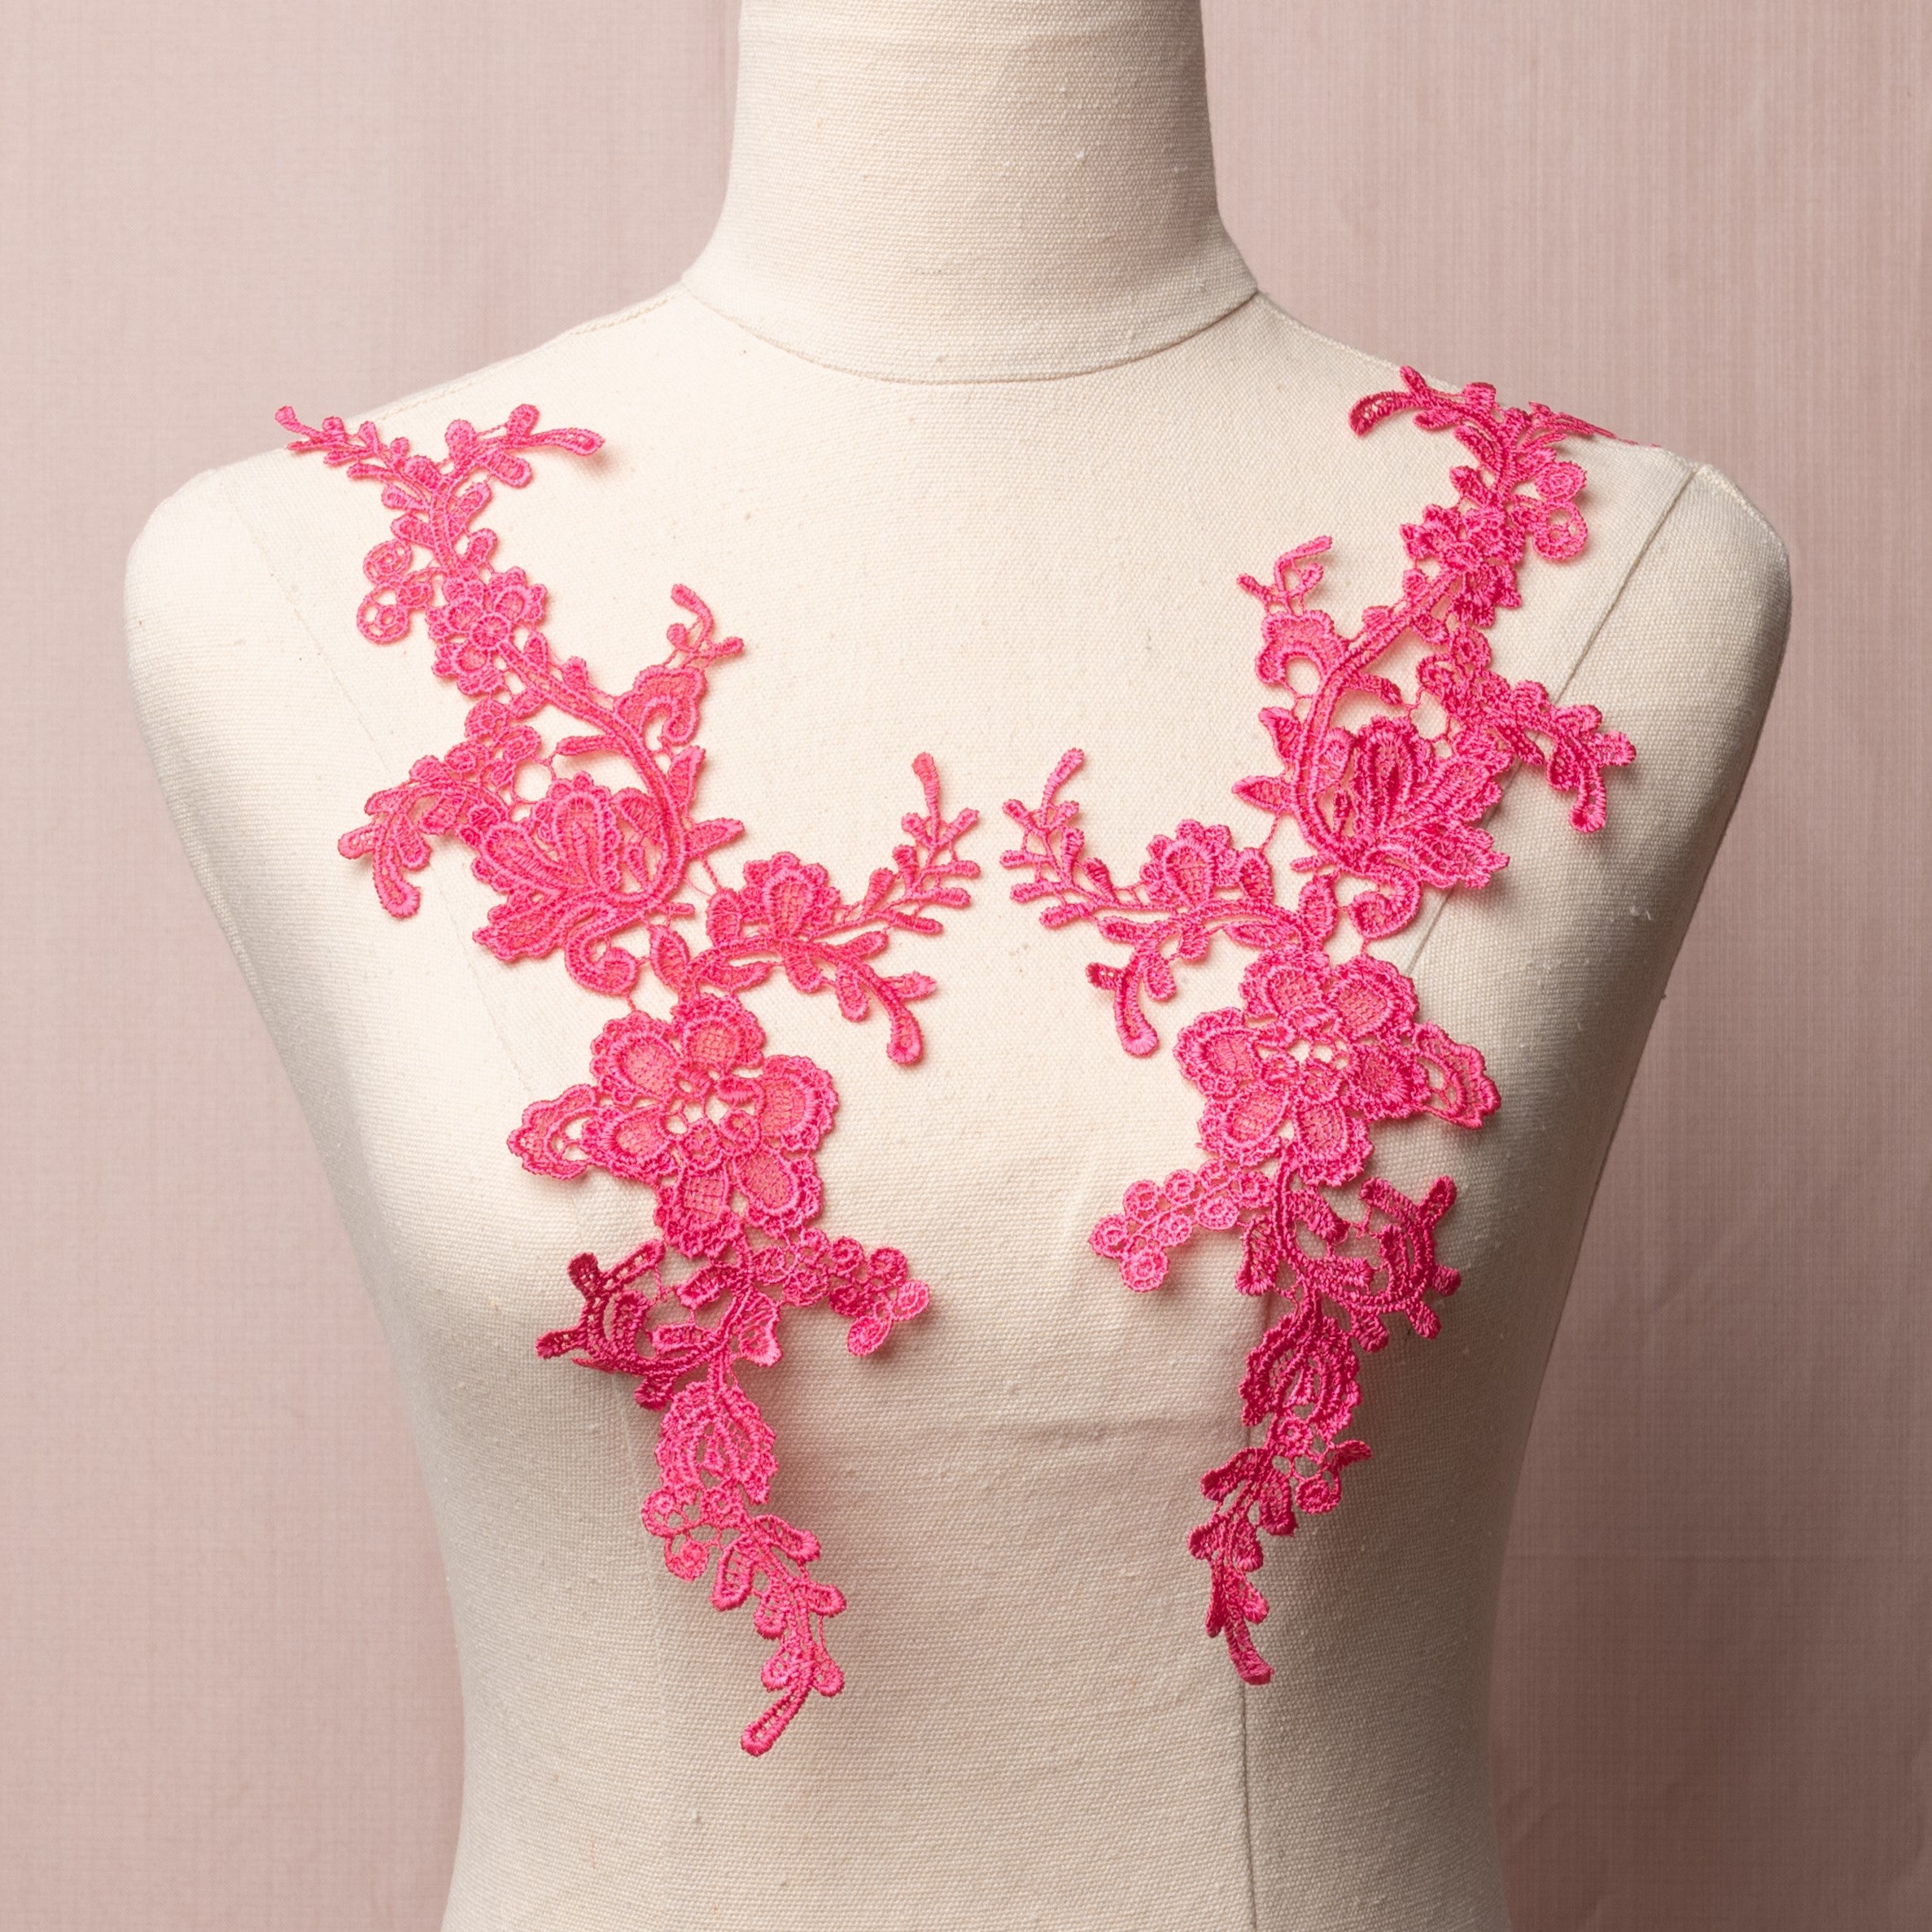 Heavily embroidered fuchsia floral applique pair displayed on a mannequin.